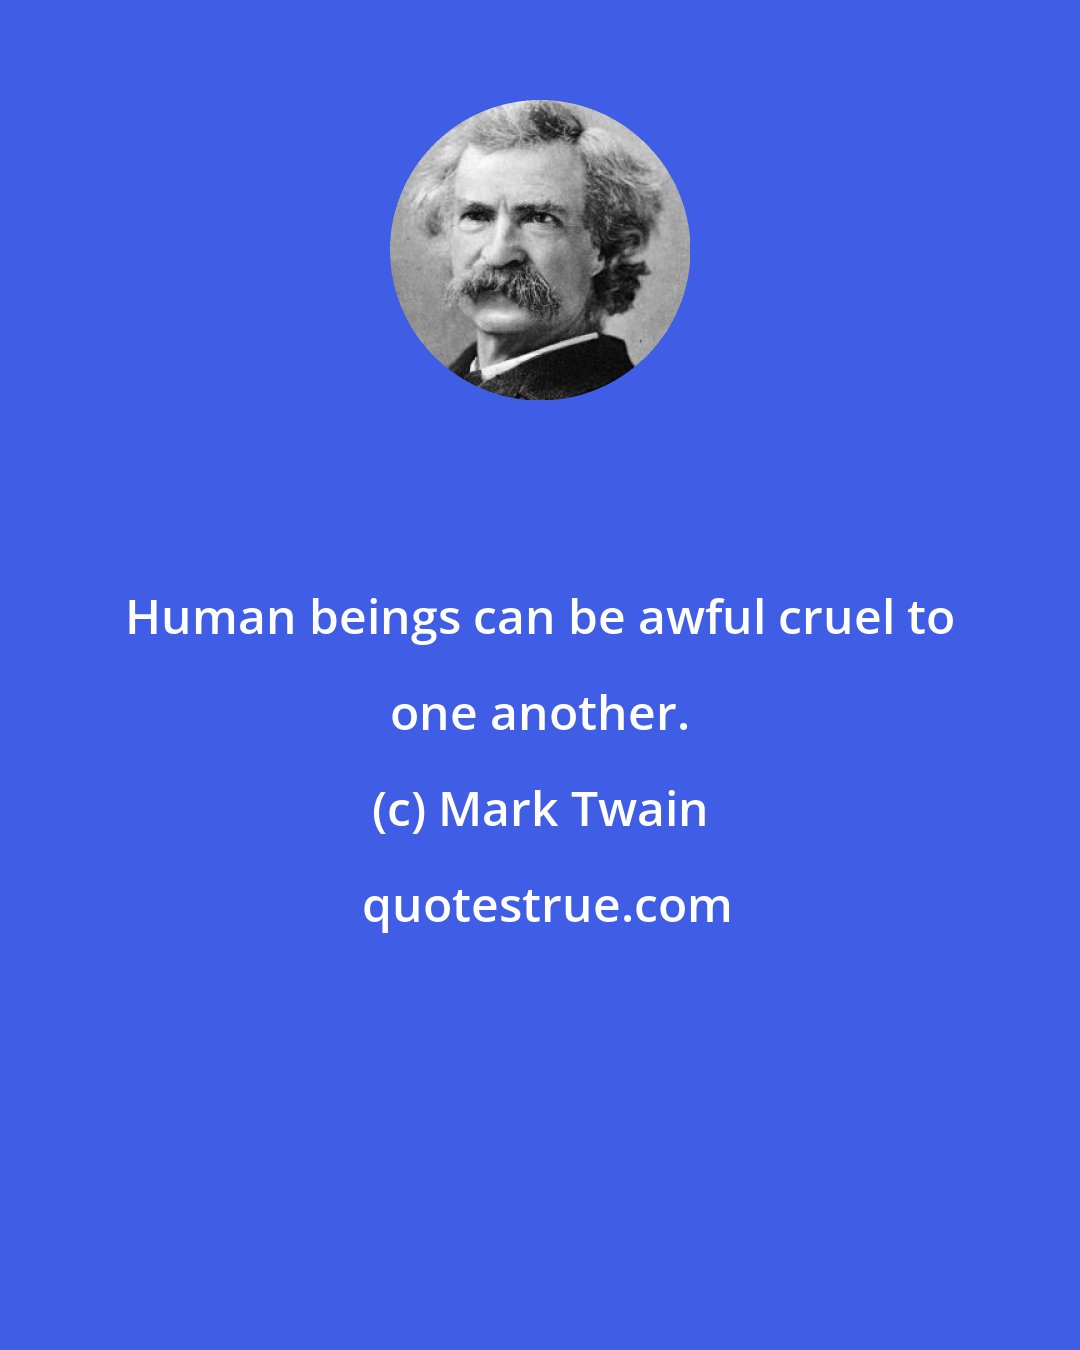 Mark Twain: Human beings can be awful cruel to one another.